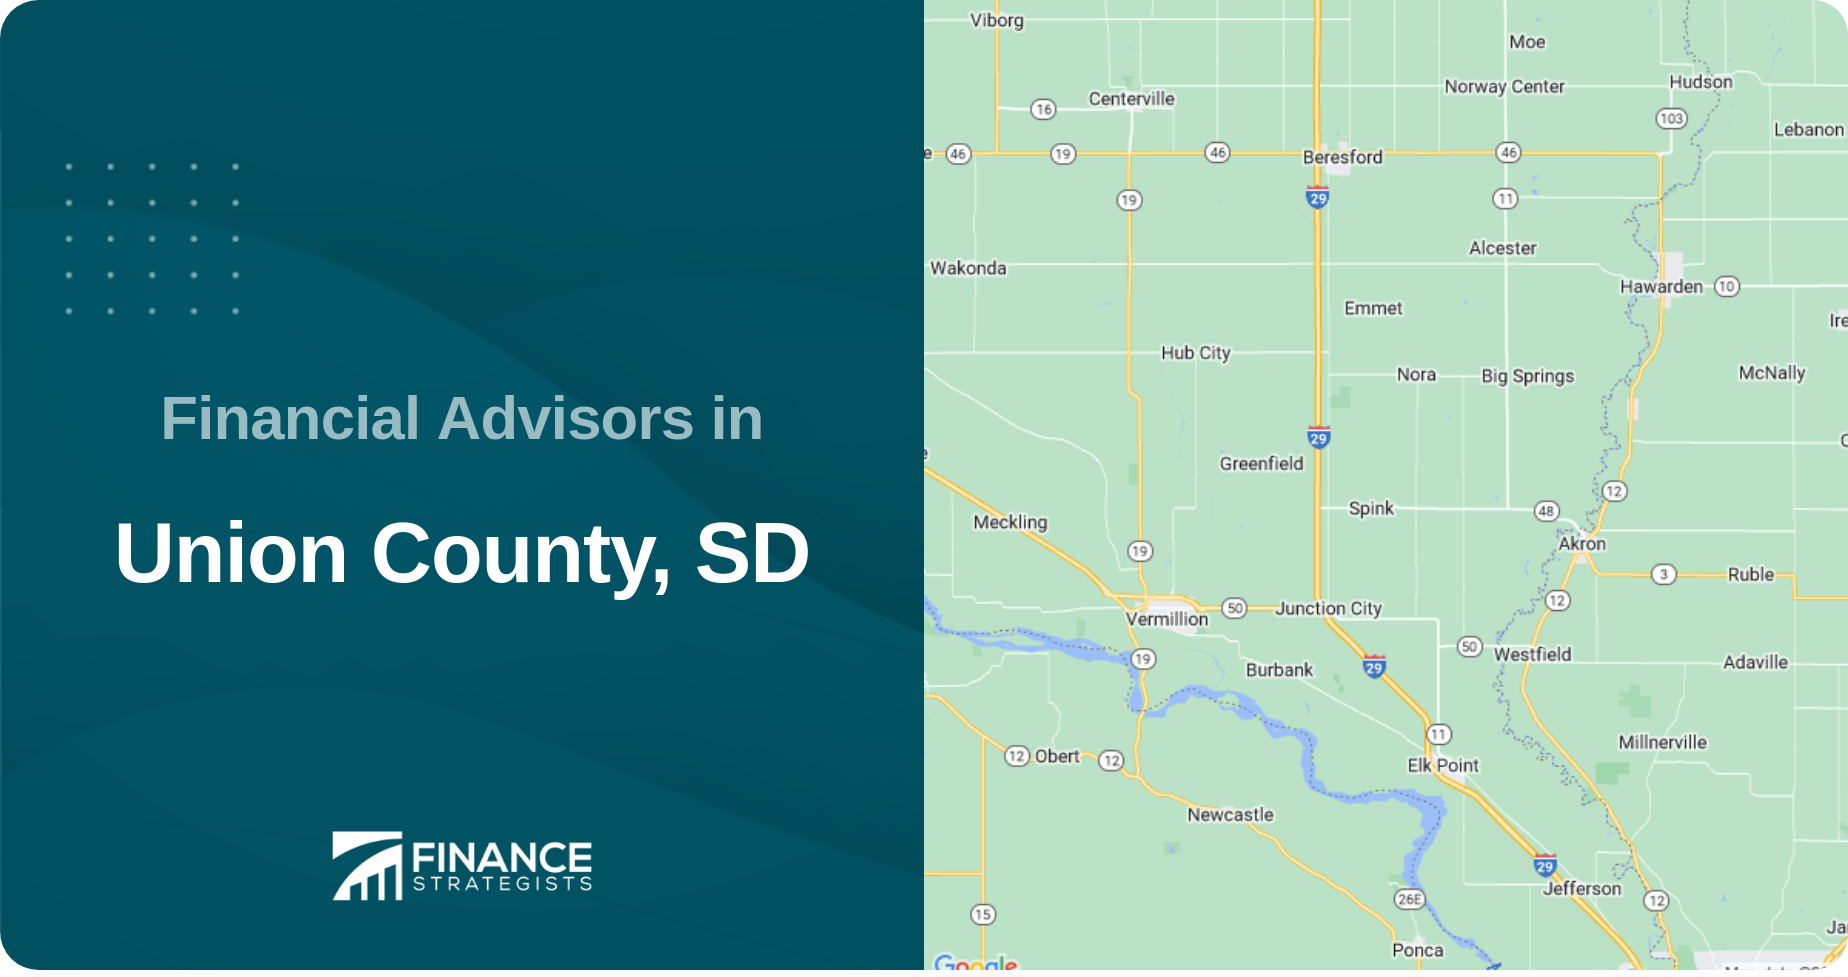 Financial Advisors in Union County, SD